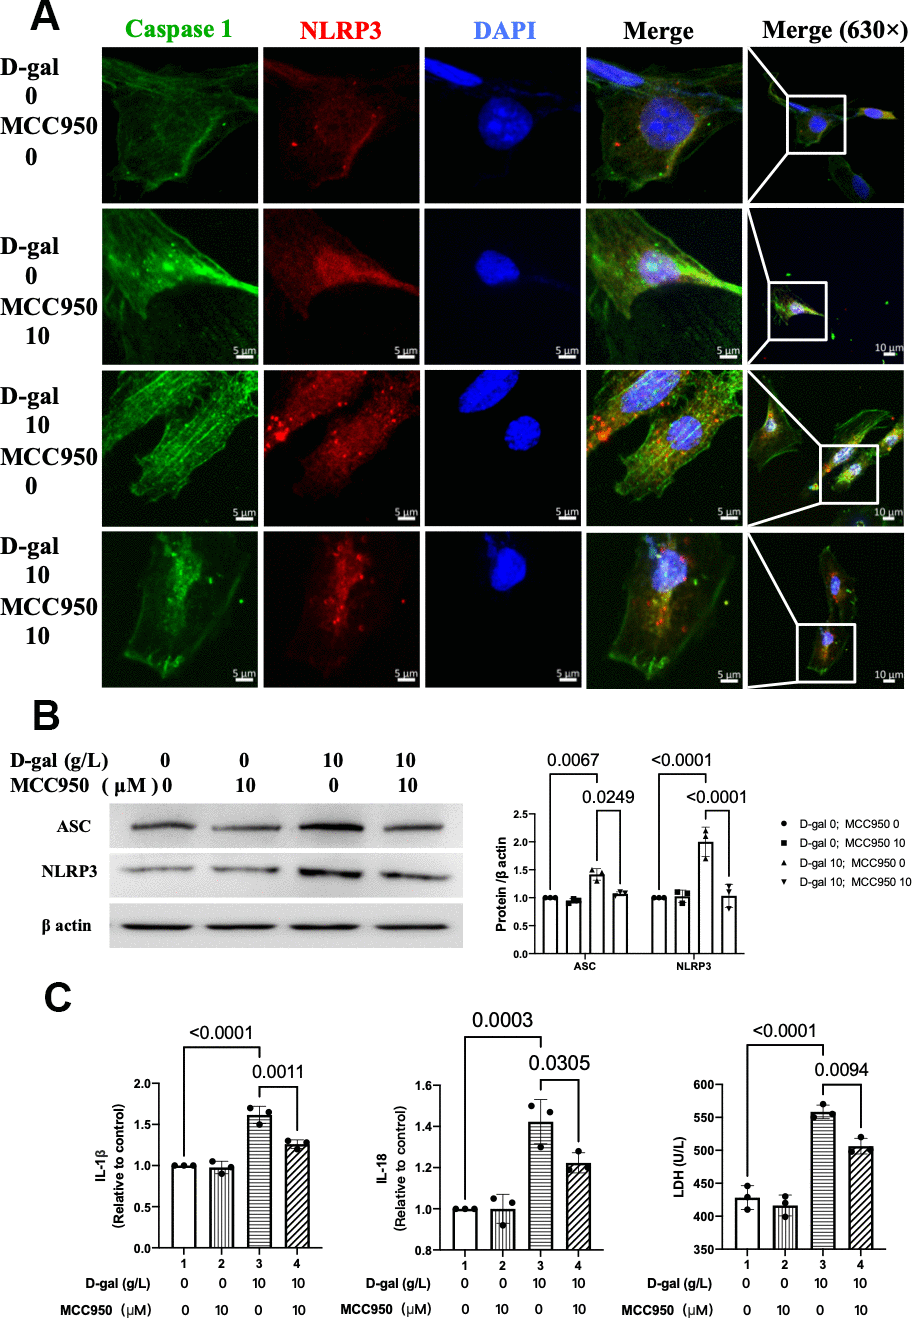 MCC950 inhibited NLRP3 inflammasomes in the cardiocytes aging model induced by D-gal. H9c2 cells were pre-treated with or without MCC950 (10μM), a commonly used NLRP3 inhibitor, for 1 hour, and then incubated with or without 10g/L D-gal for 24 hours. (A) Representative confocal fluorescent images showed that MCC950 pre-treatment decreased the colocalization of NLRP3 (red) and caspase 1 (green) proteins in the cardiocytes aging model induced by D-gal. (B) Representative immunoblots of the NLRP3 and ASC proteins and the corresponding quantification were shown. (C) IL-1β, IL-18 and LDH release levels in cell culture were detected. NLRP3, Nod-like receptor family pyrin domain containing 3; ASC, apoptosis-associated speck-like protein.